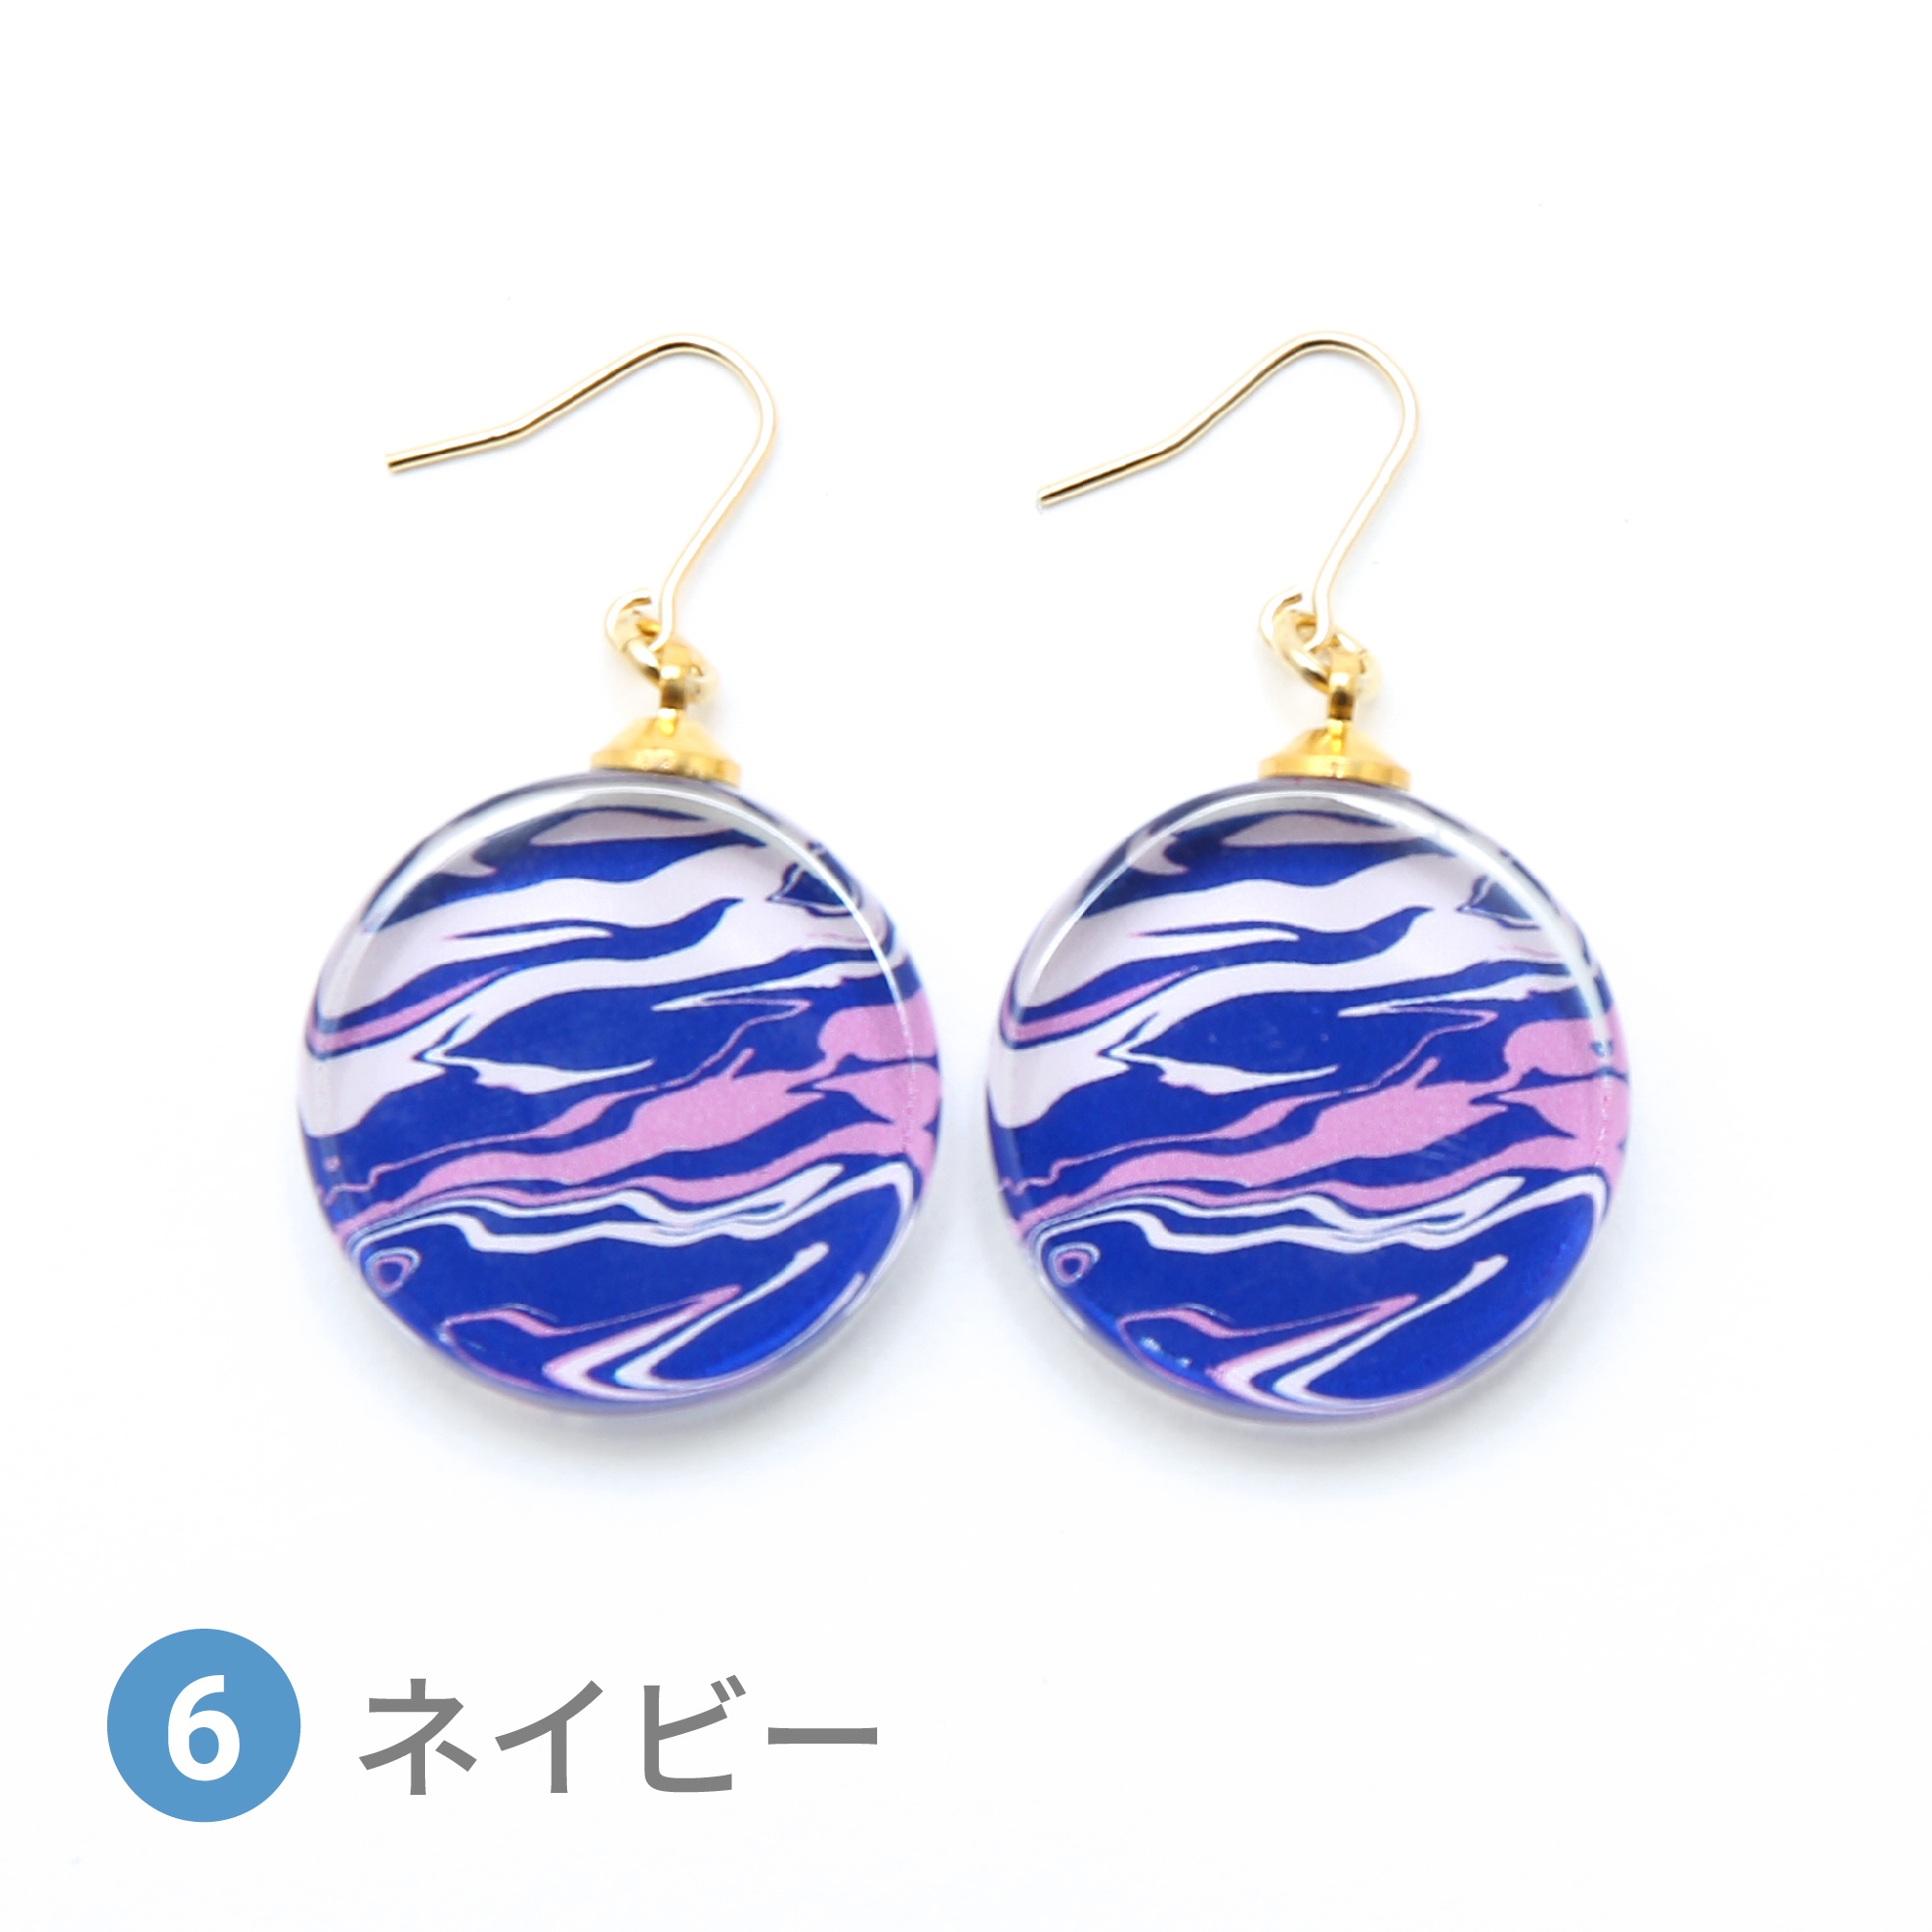 Glass accessories Pierced Earring MARBLE navy round shape